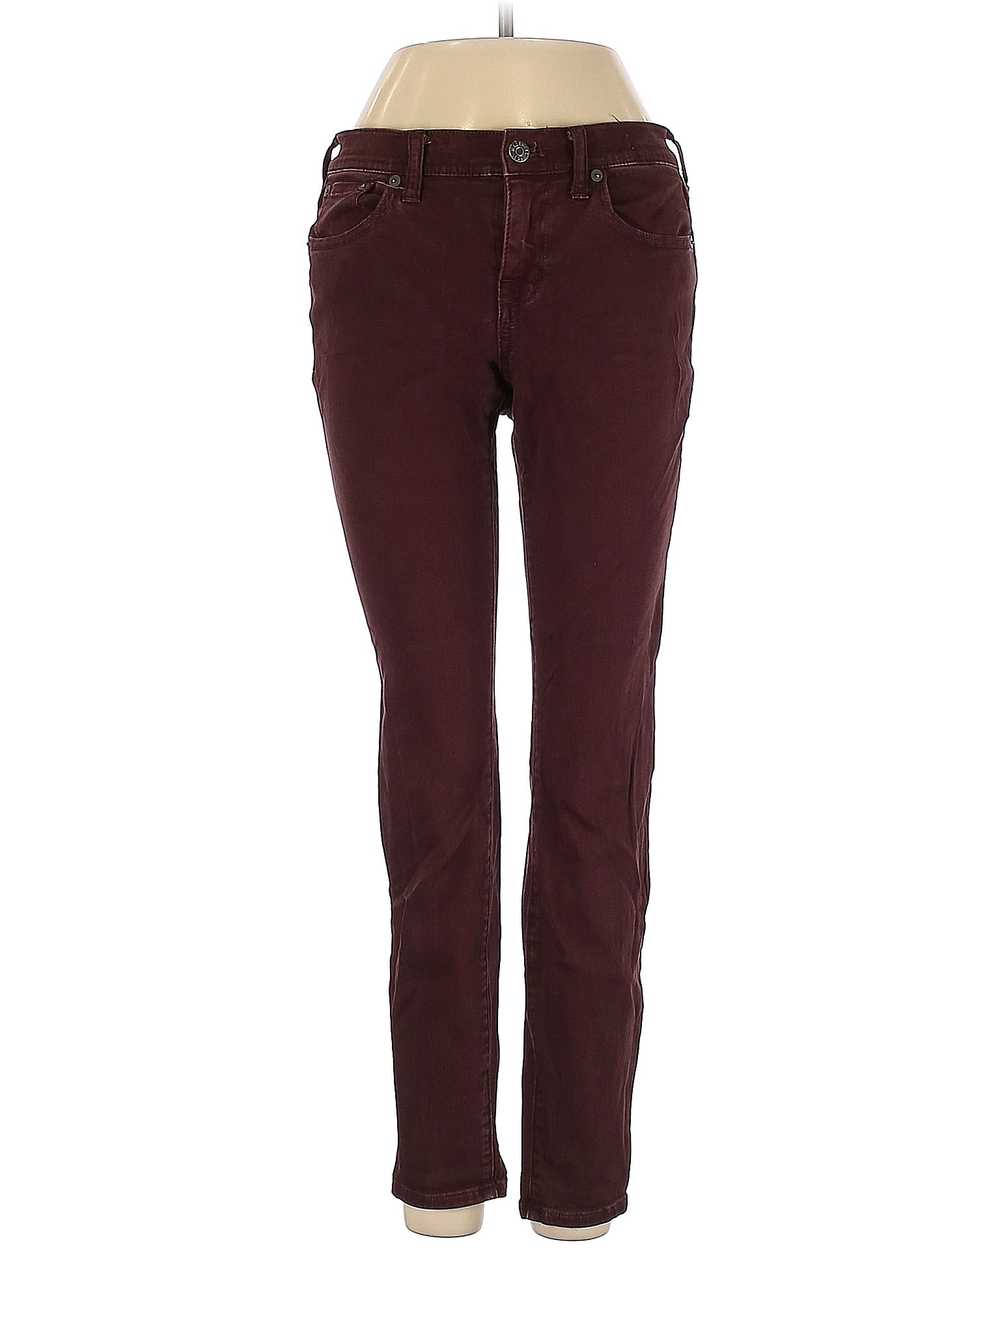 Madewell Women Red Jeans 26W - image 1